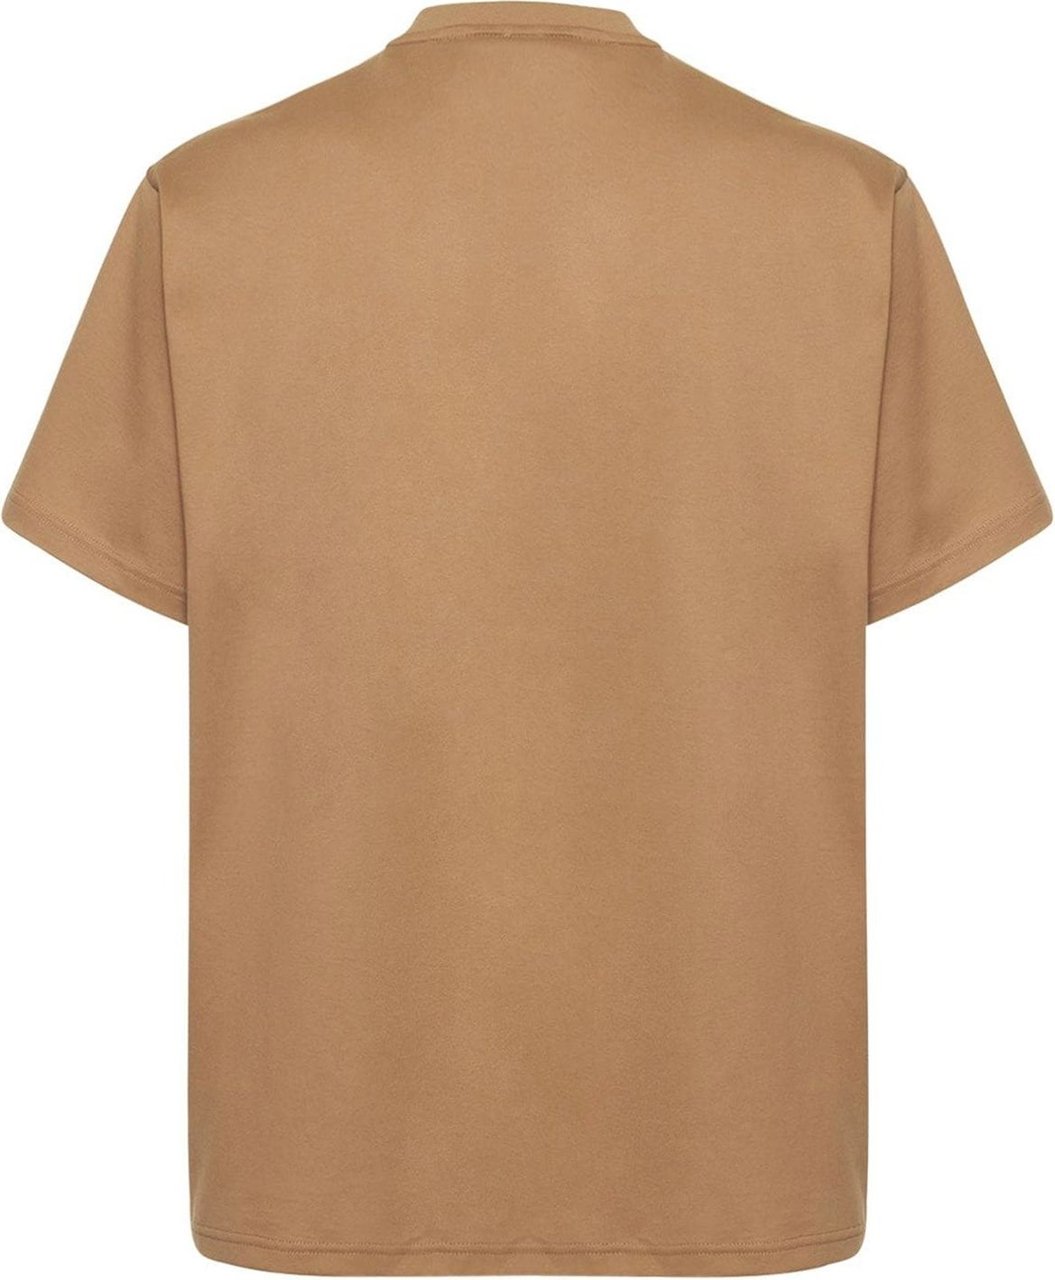 Burberry Cotton t-shirt with logo print. This product contains organic cotton Bruin